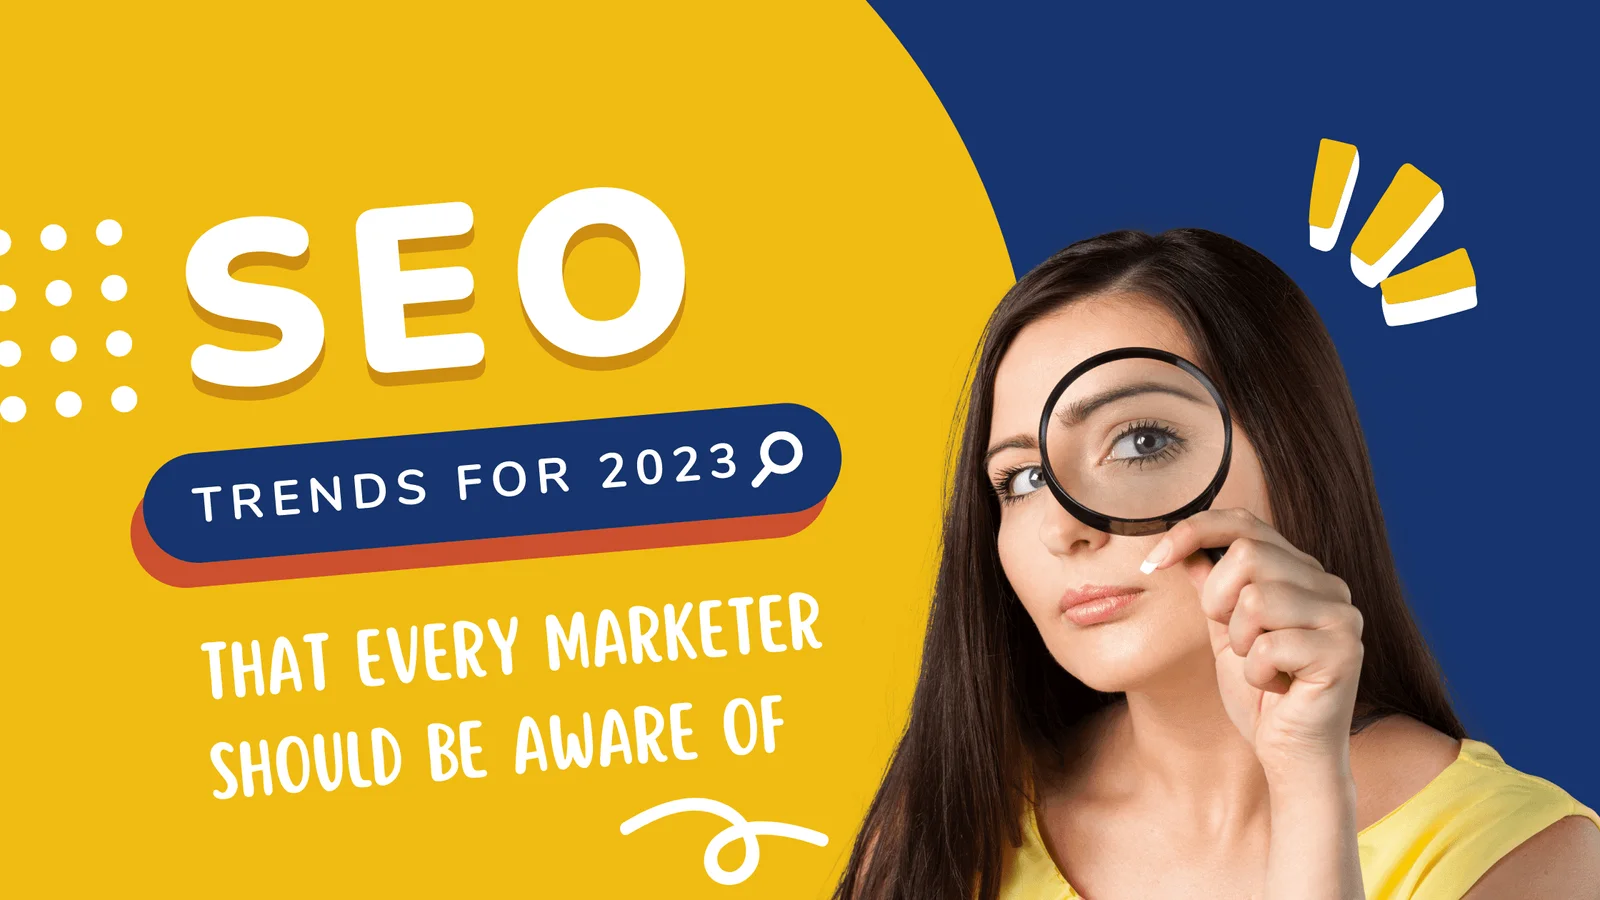 Top 13 SEO Trends for 2023 That Every Marketer Should Be Aware Of